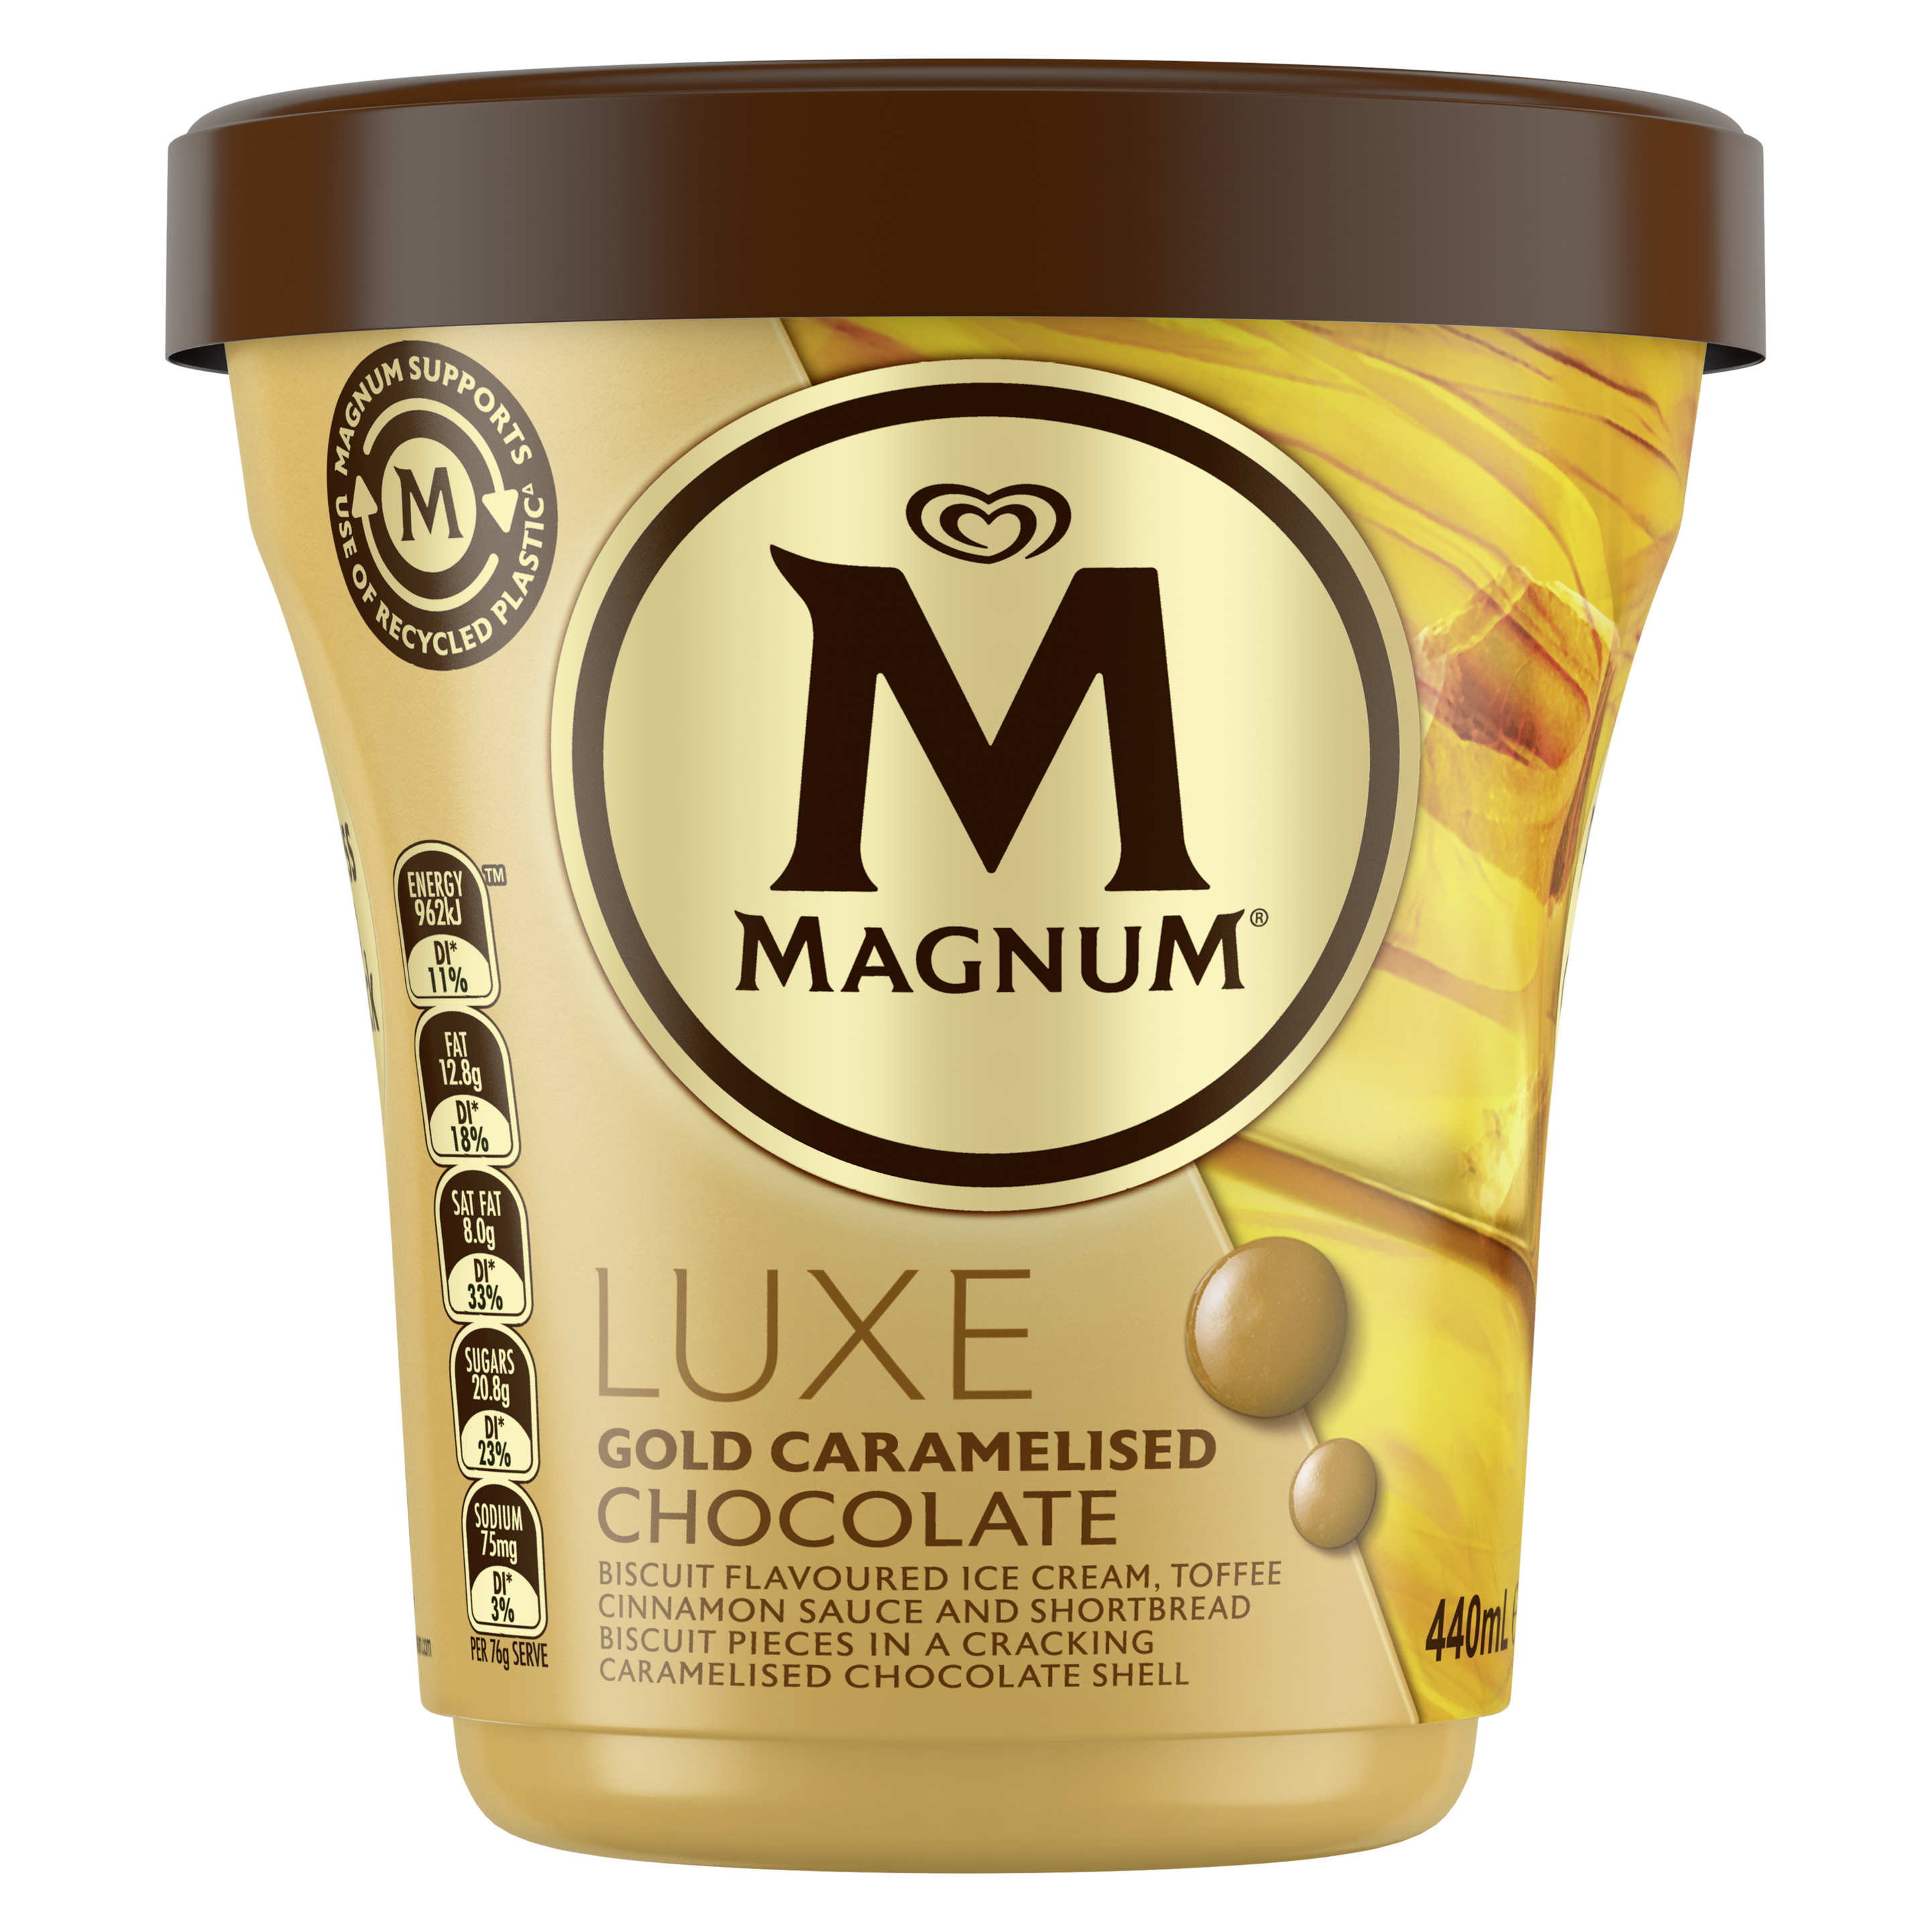 Magnum Pint Luxe Gold Caramelised Chocolate